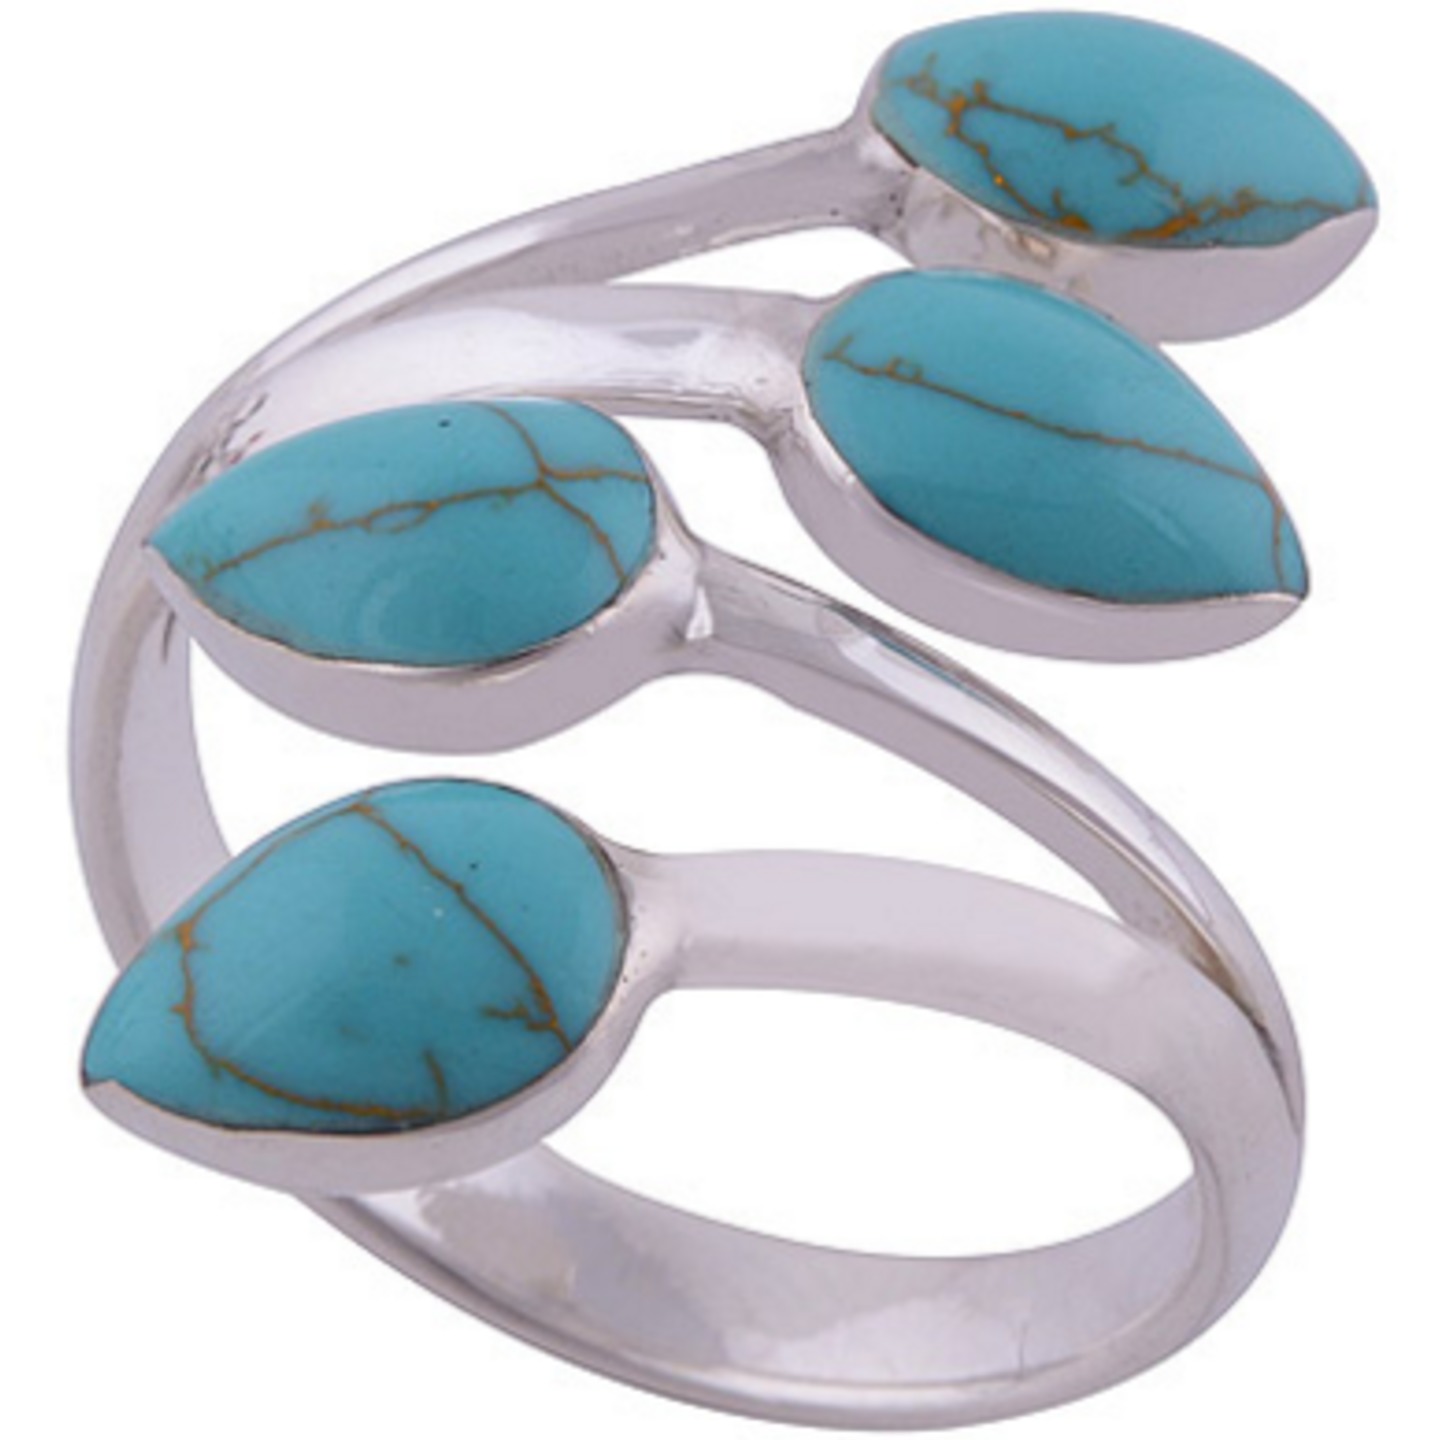 The Turquoise Bud Silver Ring